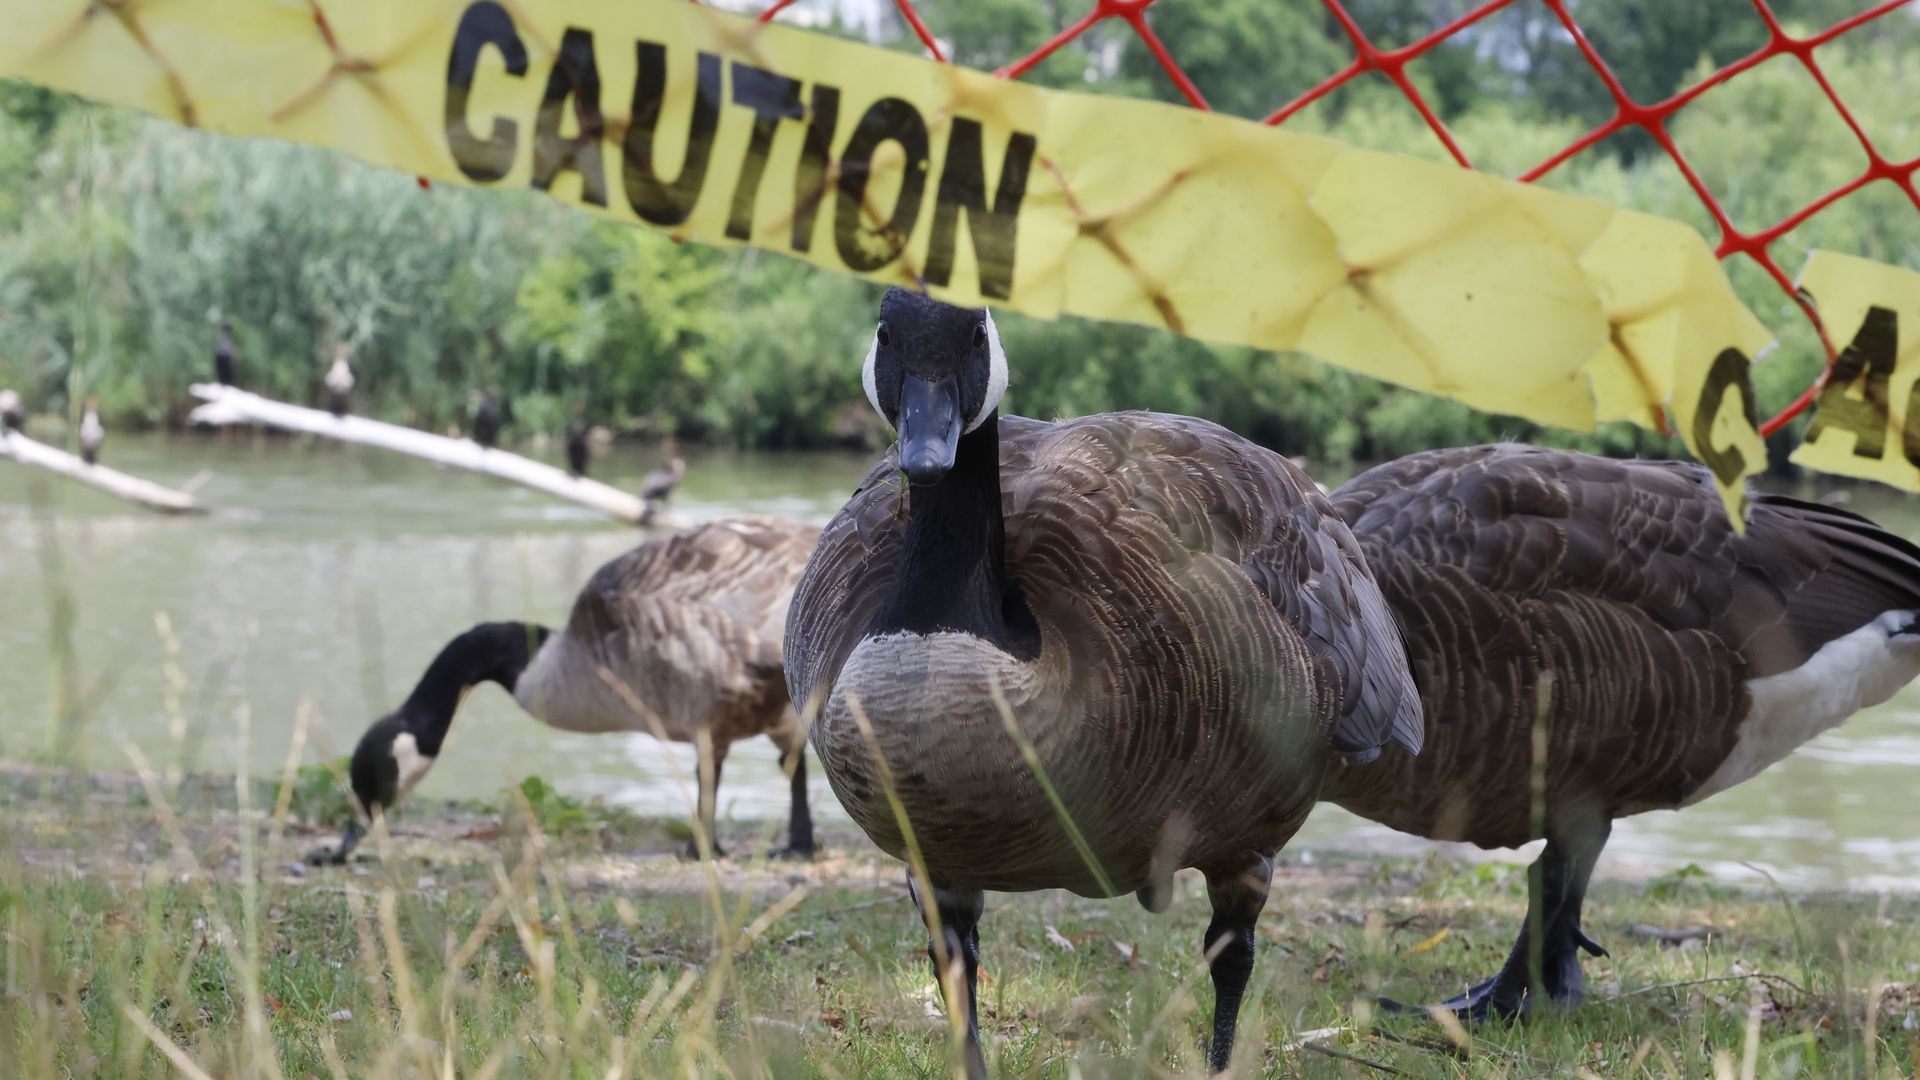 Canada geese shown behind some caution tape